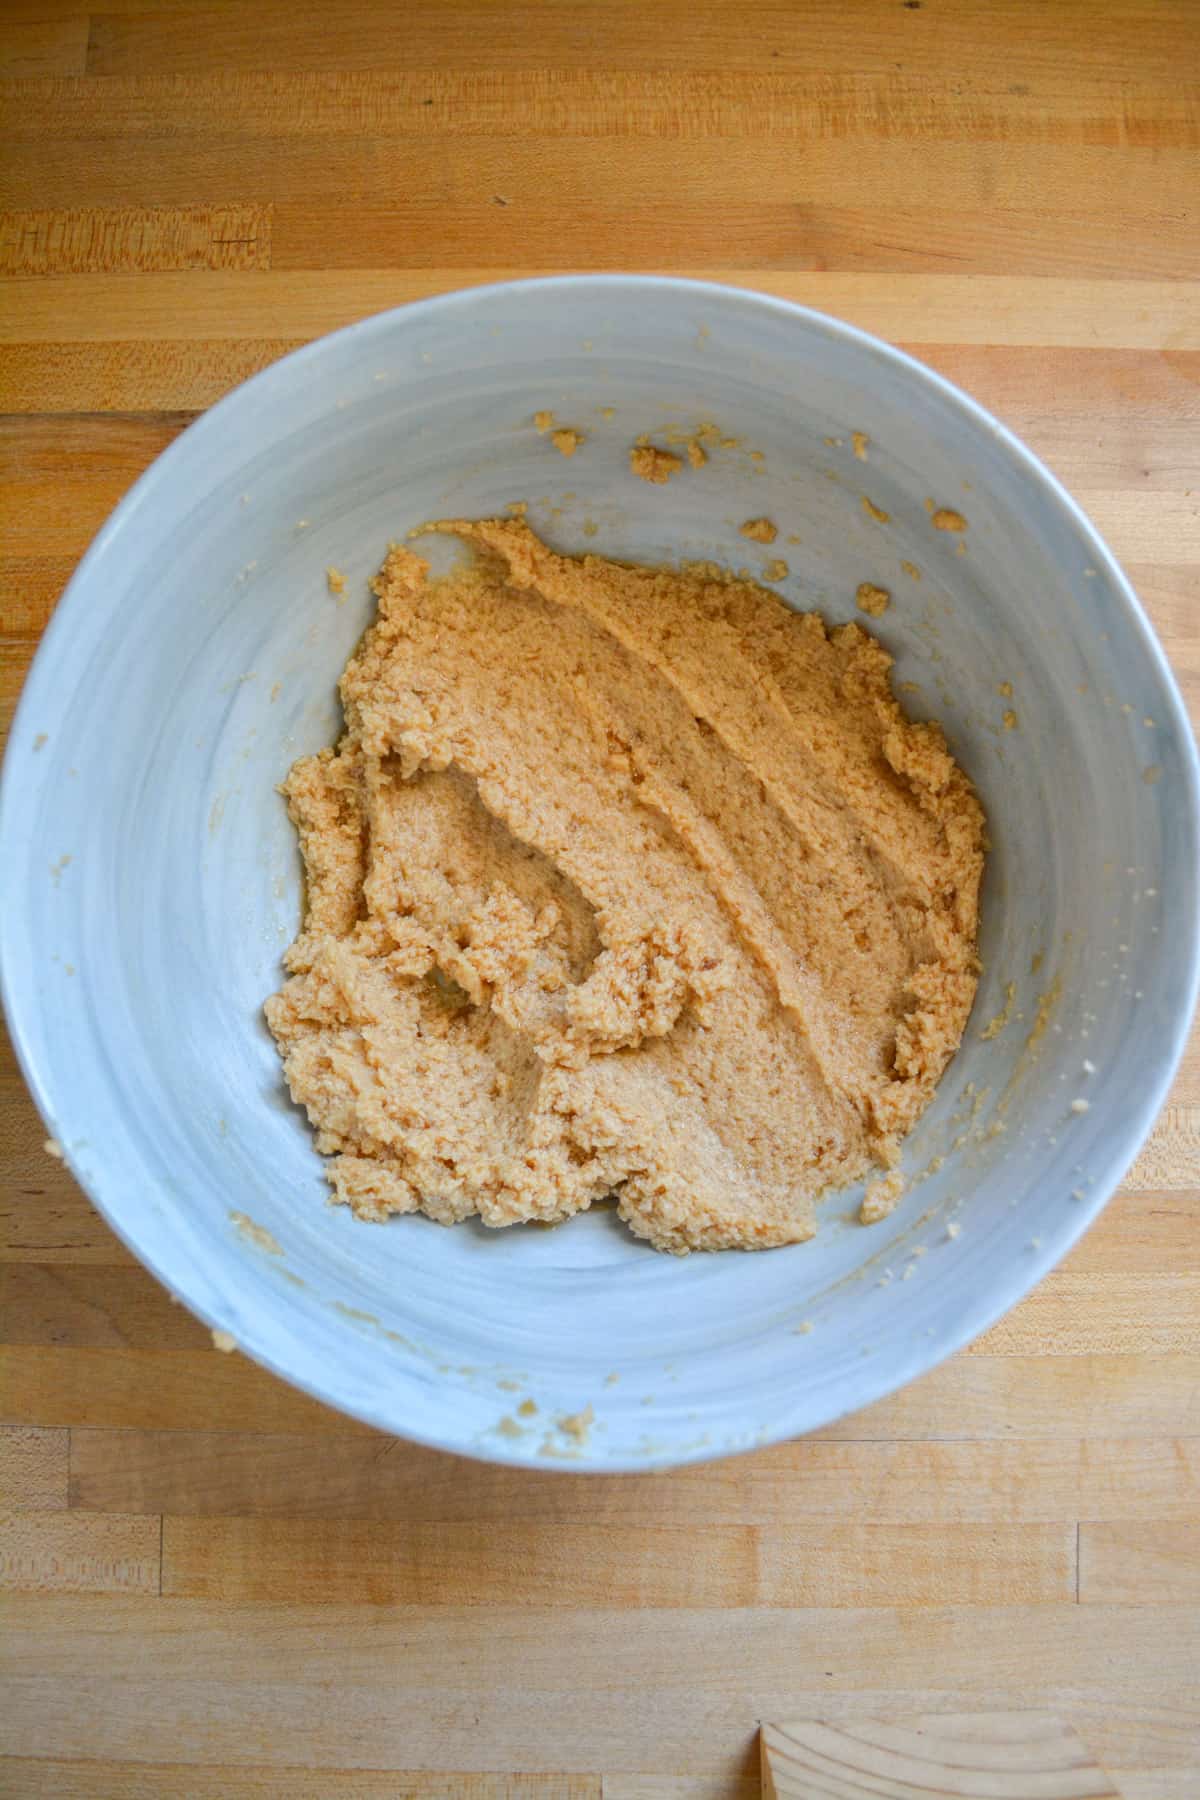 Vegan butter and brown sugar creamed together in a bowl.